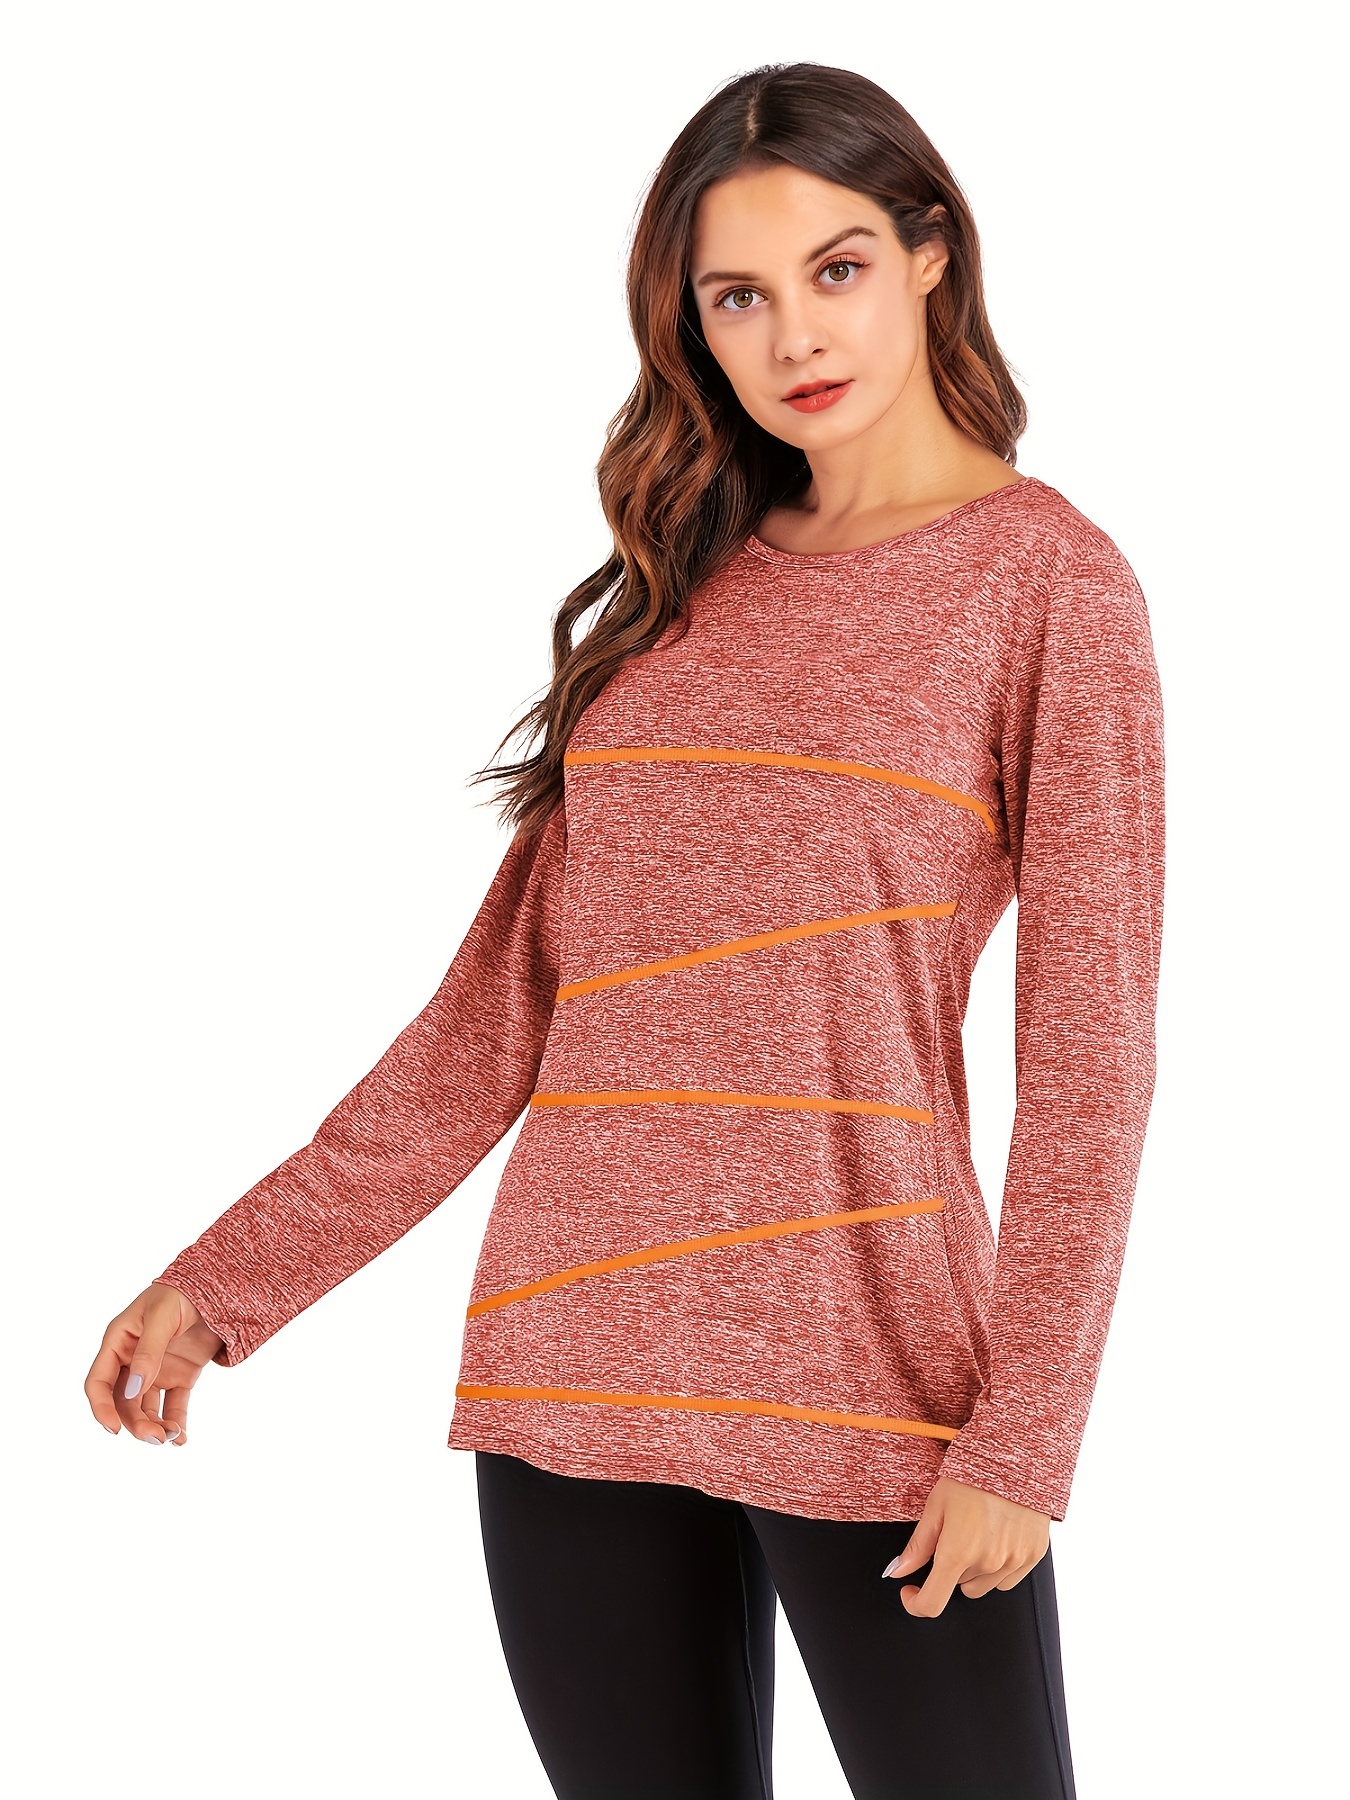 Activewear T-Shirts for Women, Long Sleeve & Short Sleeve